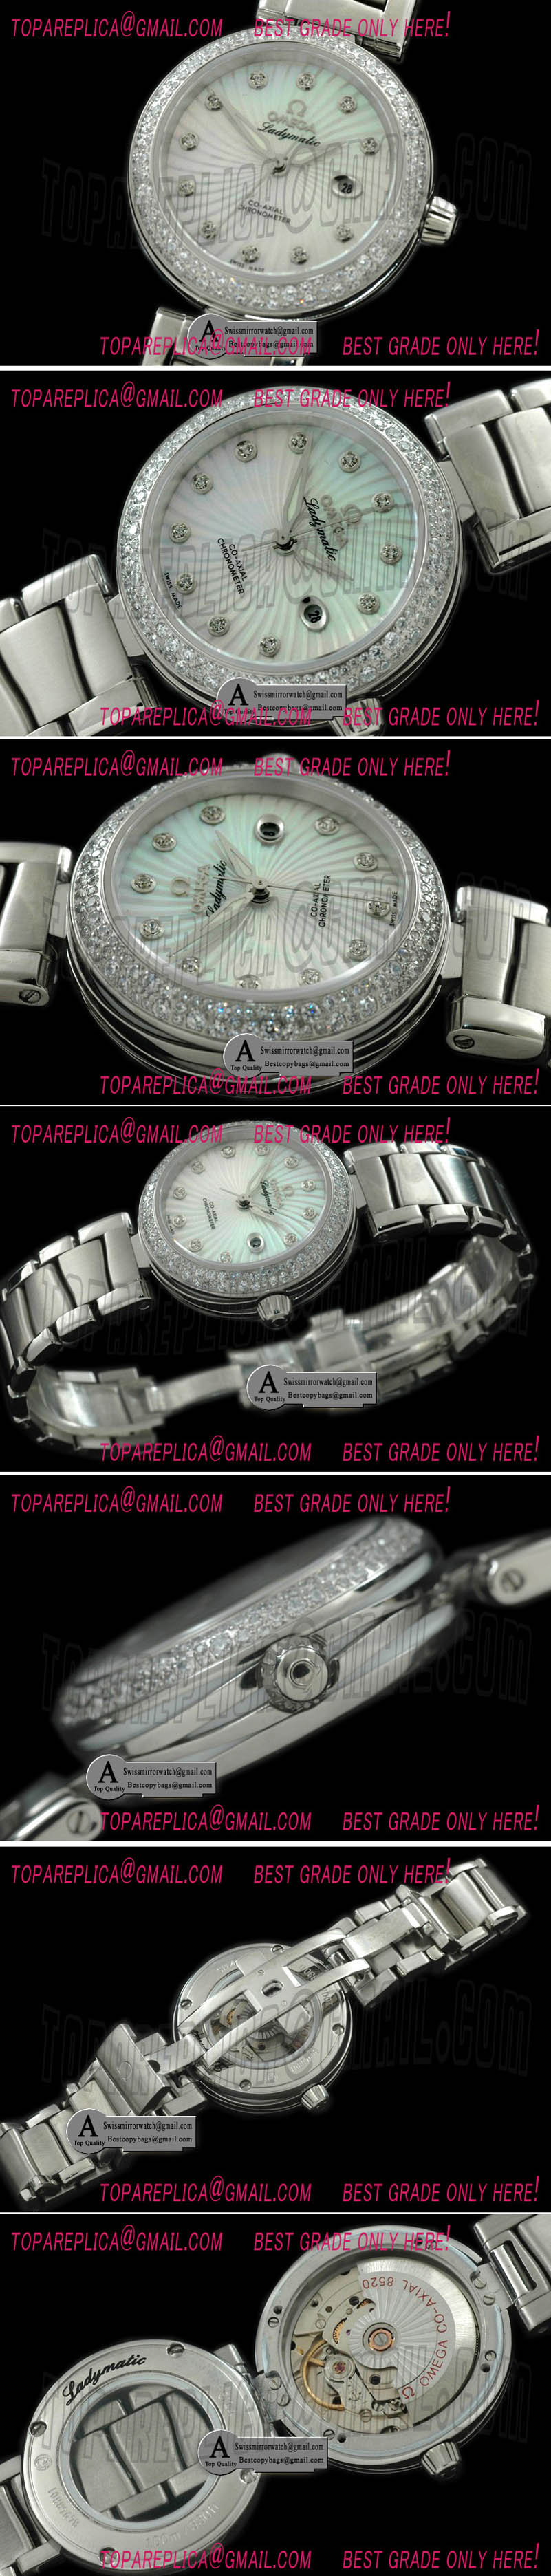 Omega 425.35.34.20.55.001 Deville Ladymatic Mid SS/SS White A-2836 Replica Watches